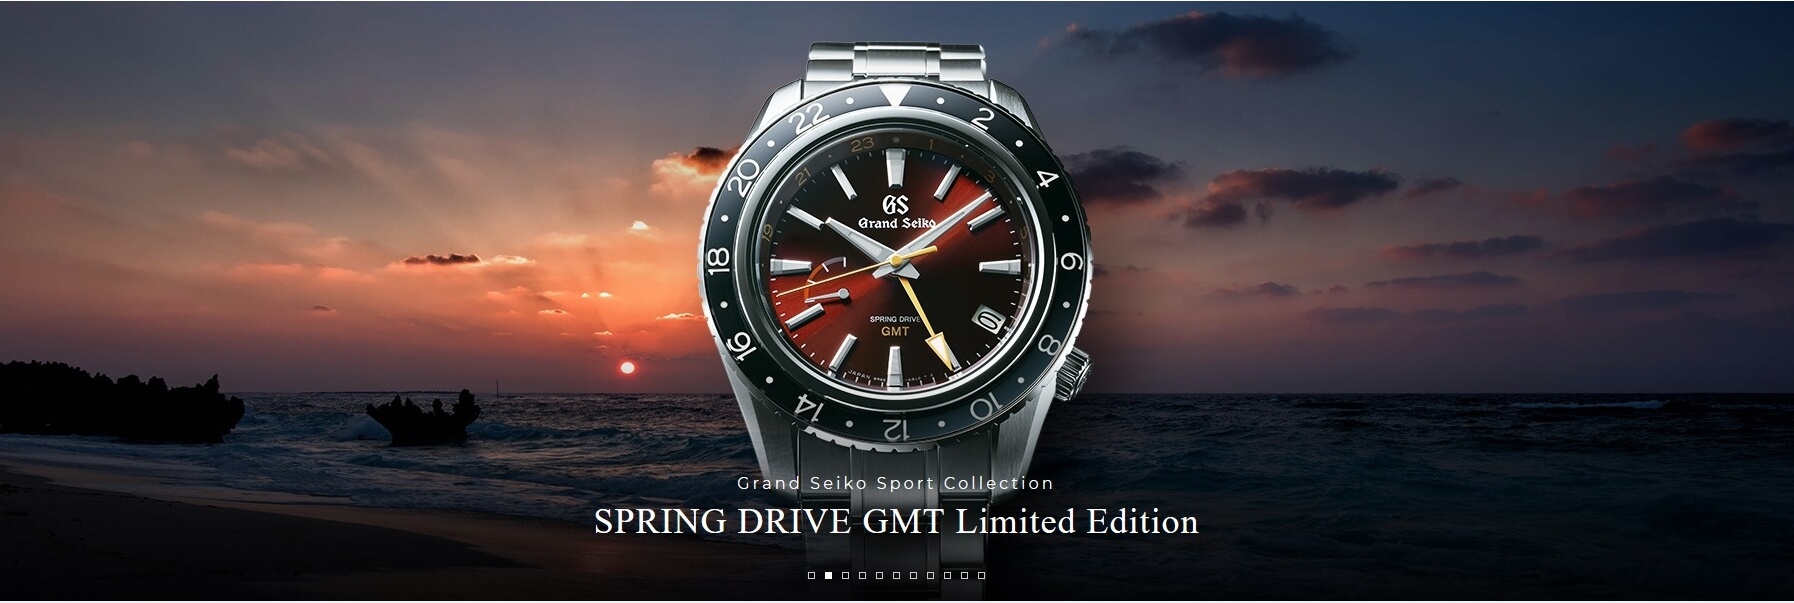 Grand Seiko Sport Collection Spring Drive GMT Limited Edition